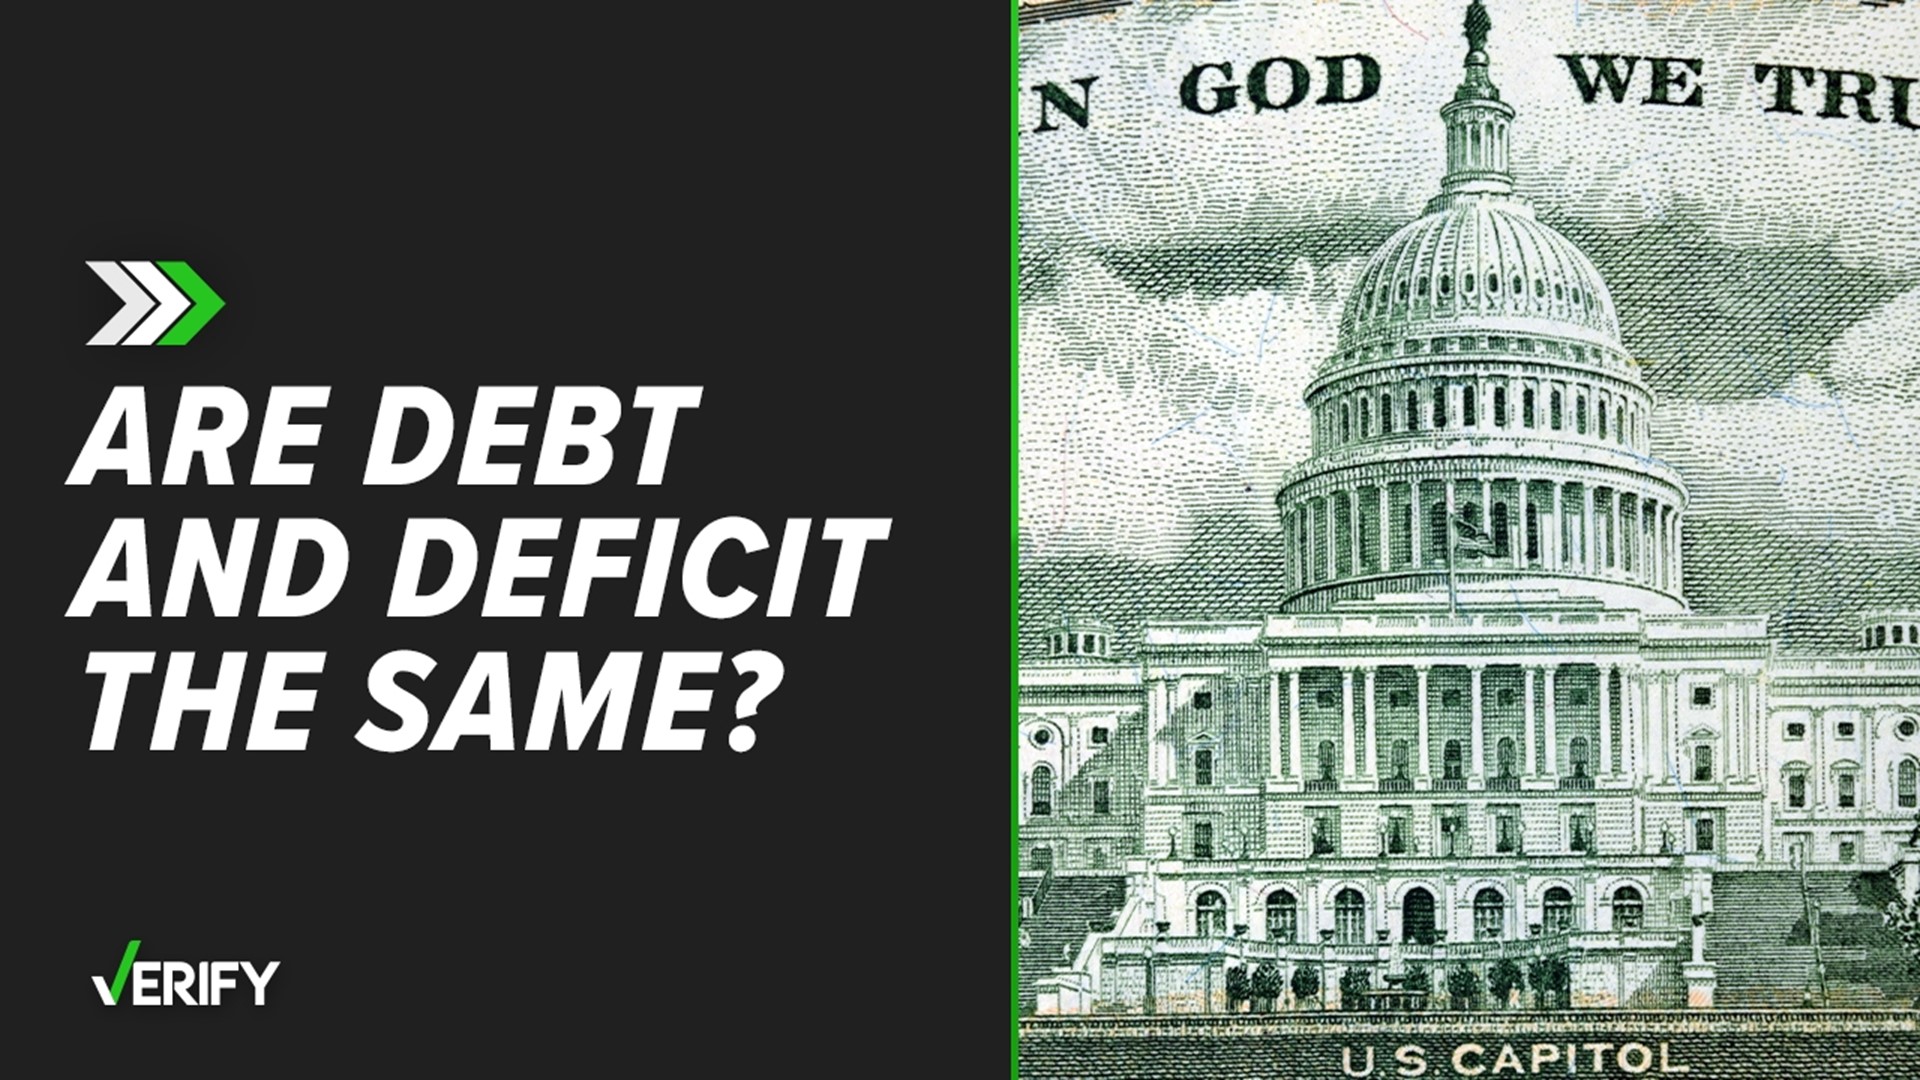 Here’s the difference between the debt and the deficit.